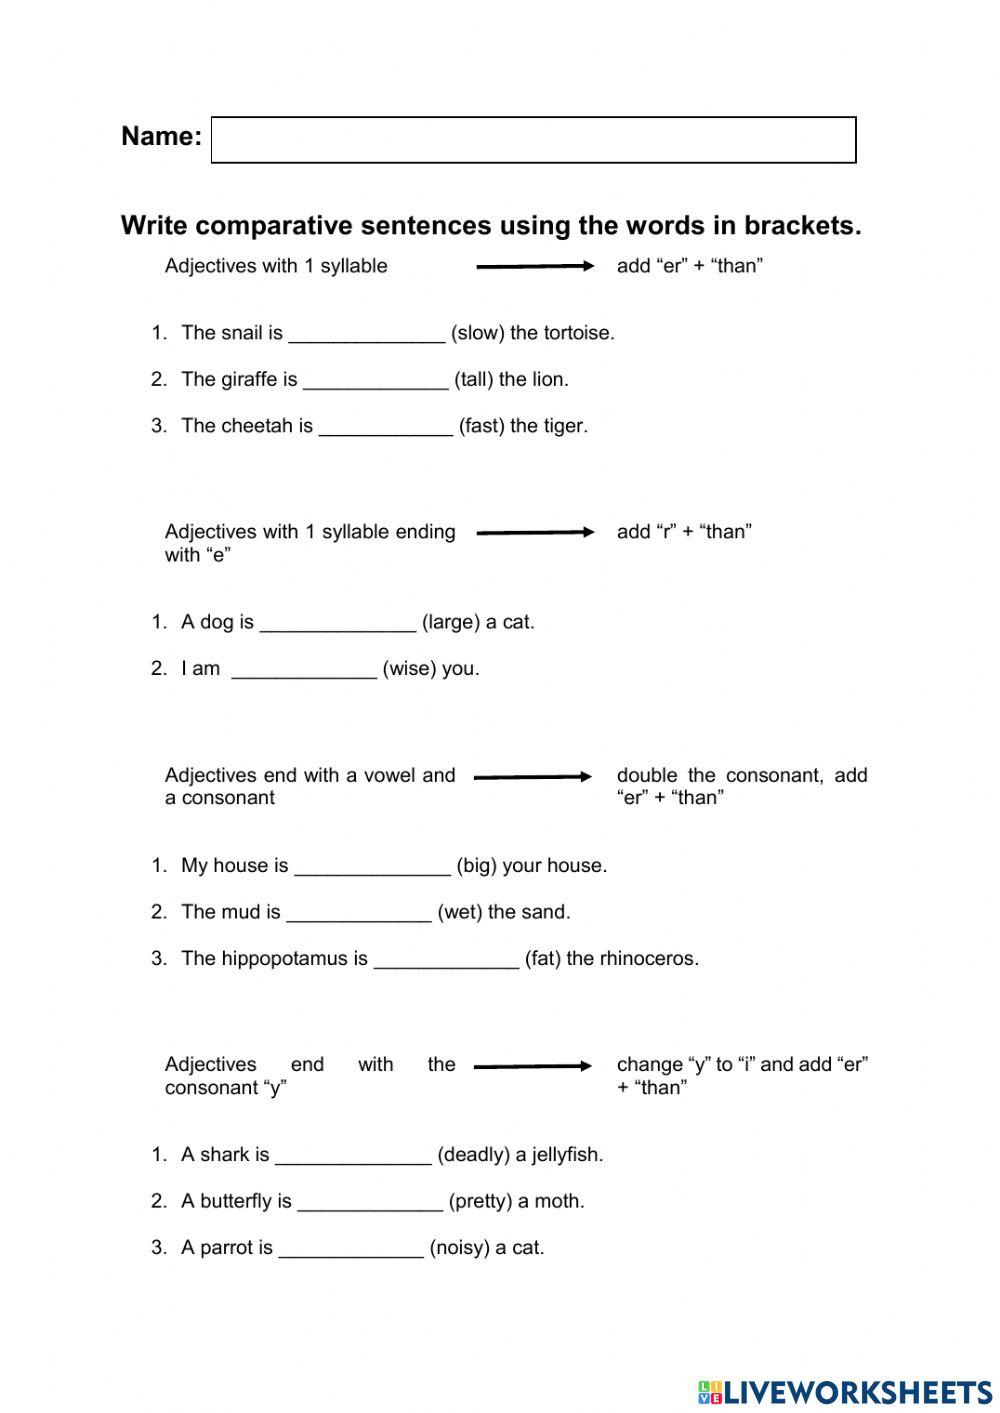 A Writing Exercise For Comparative Adjectives